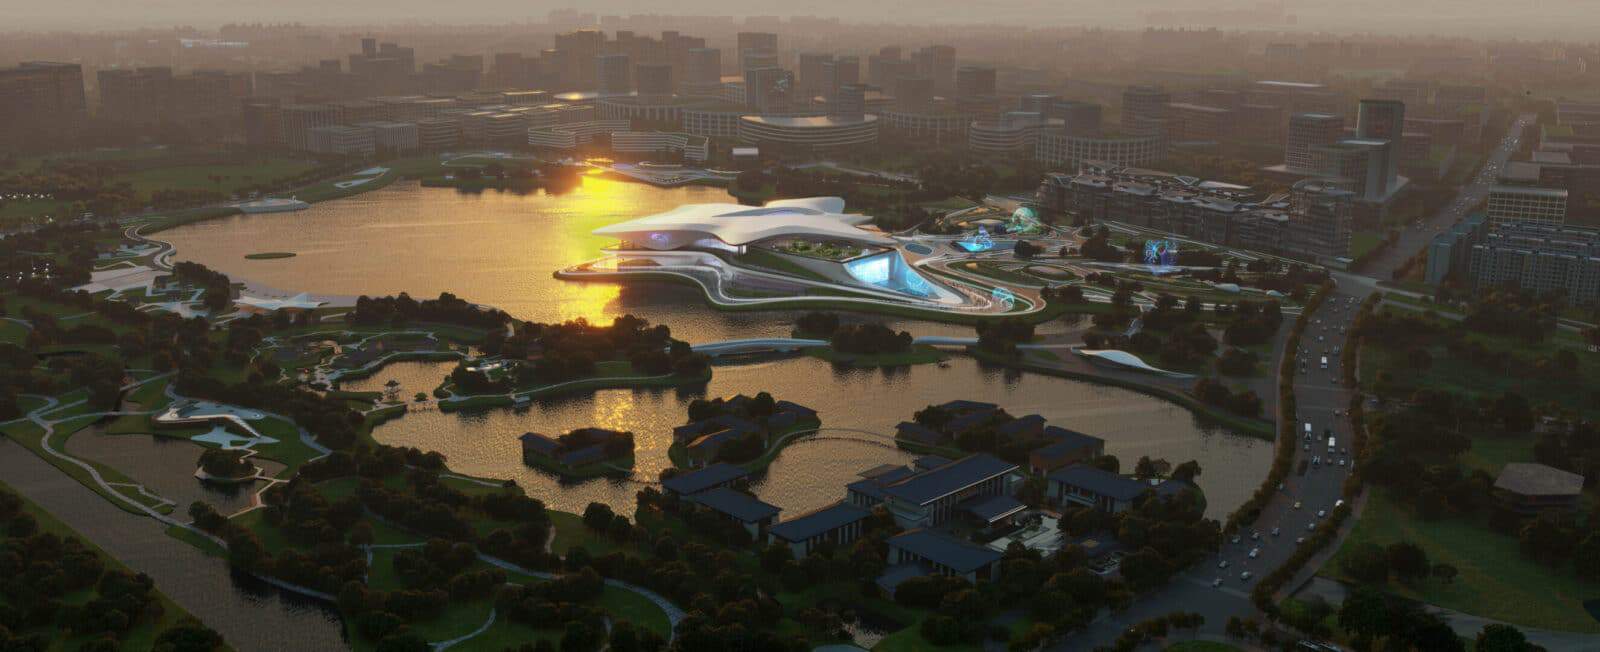 ZHA Chengdu Science Fiction Museum Render by Atchain 7 lores 2652x1080 1